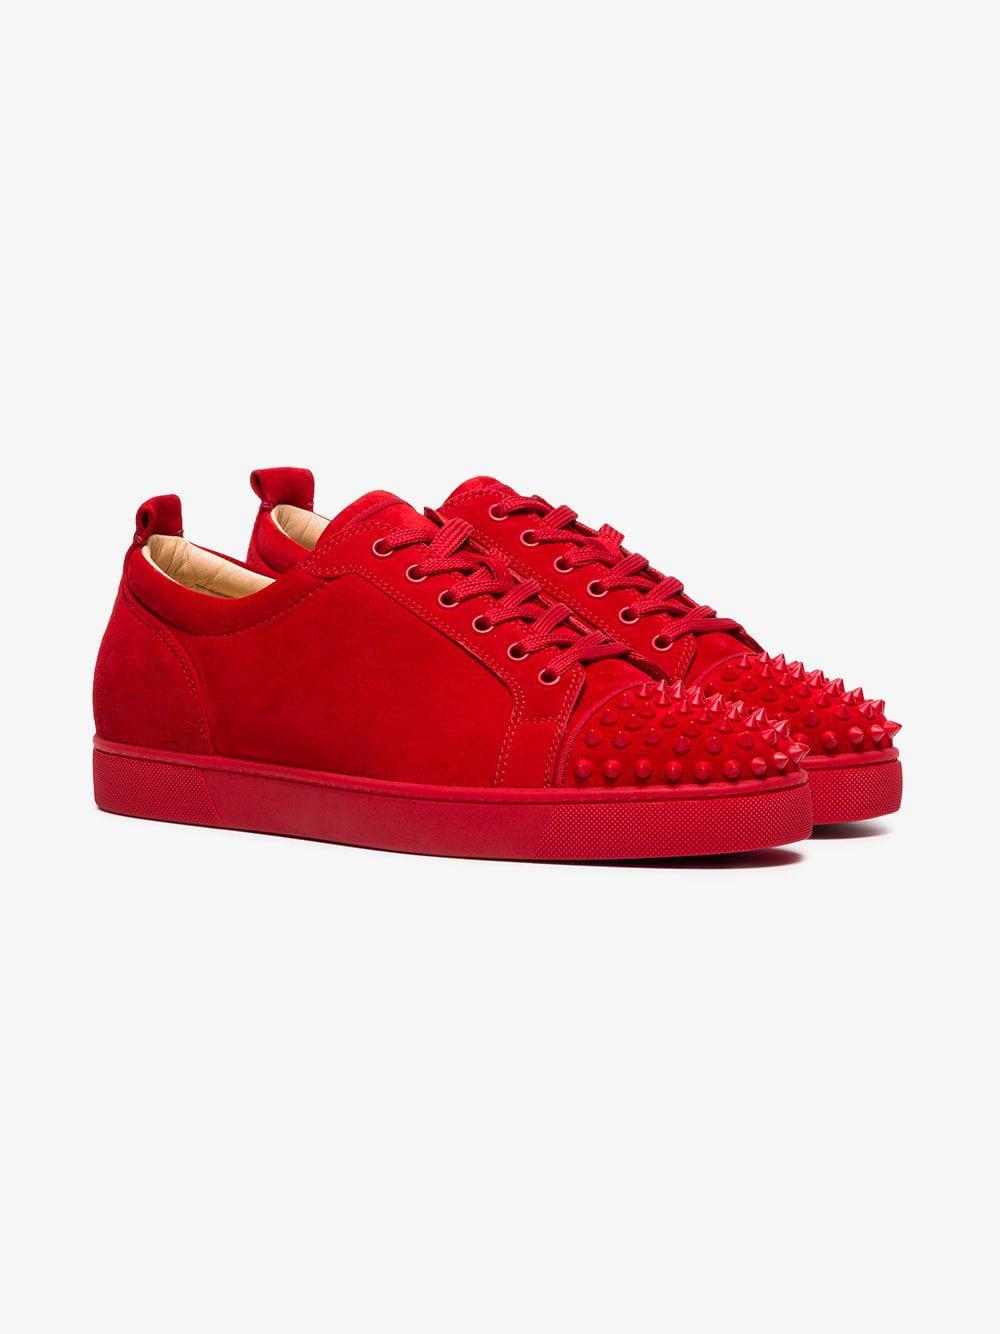 Christian Louboutin Red Suede Louis Junior Spikes Sneakers - Lyst